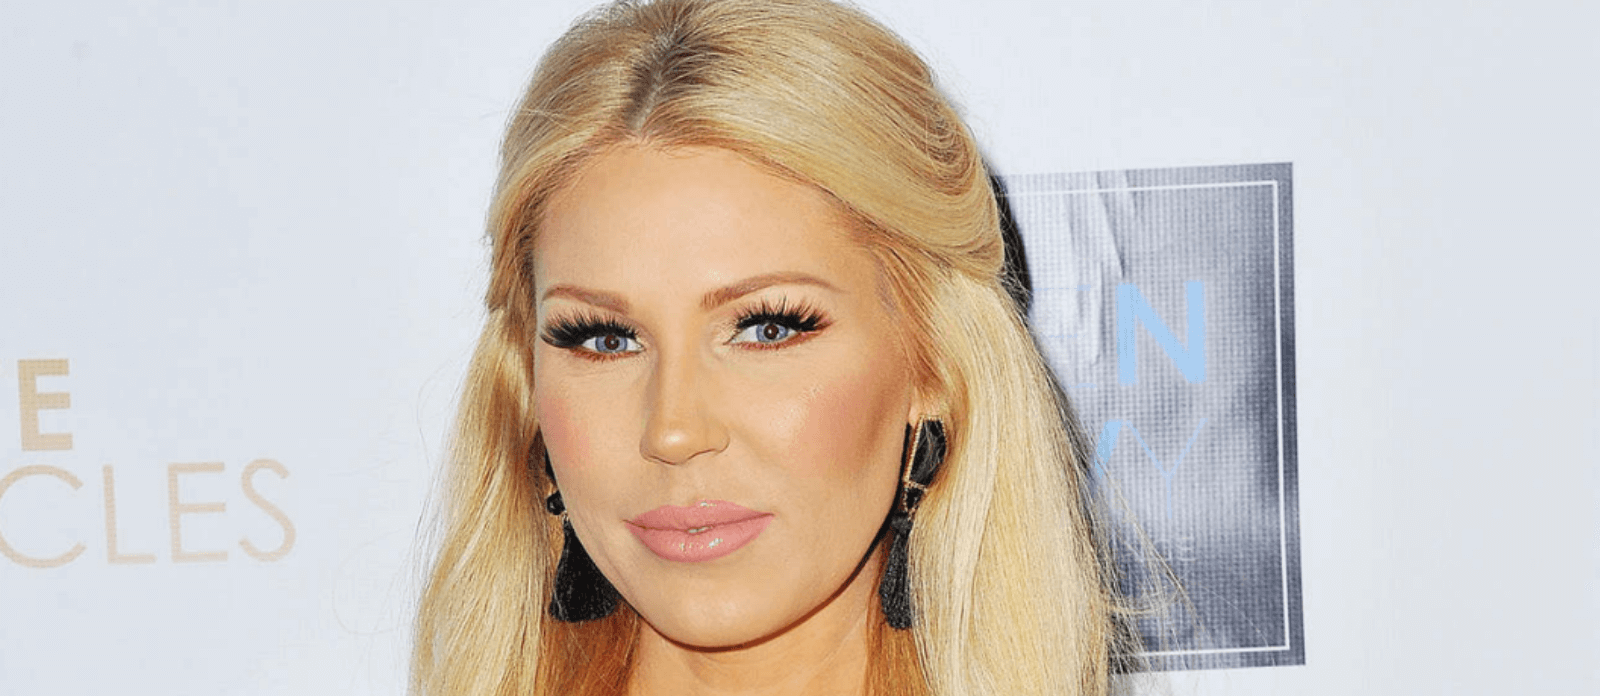 Gretchen Rossi to Testify Against Shannon & Tamra!